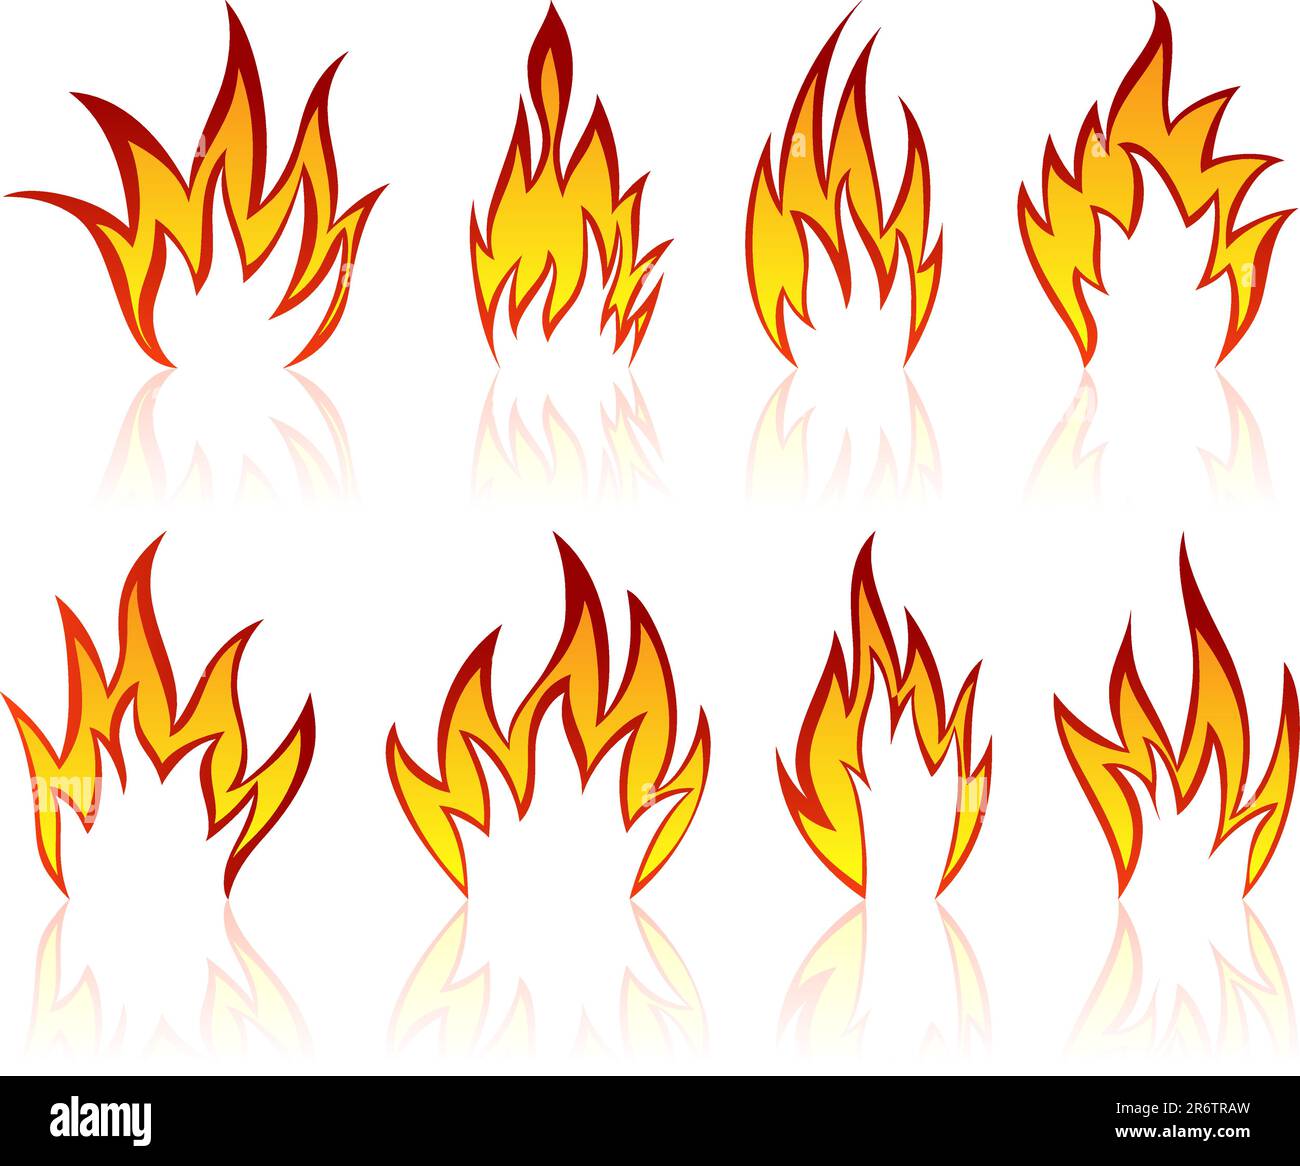 Set of different fire patterns for design use Stock Vector